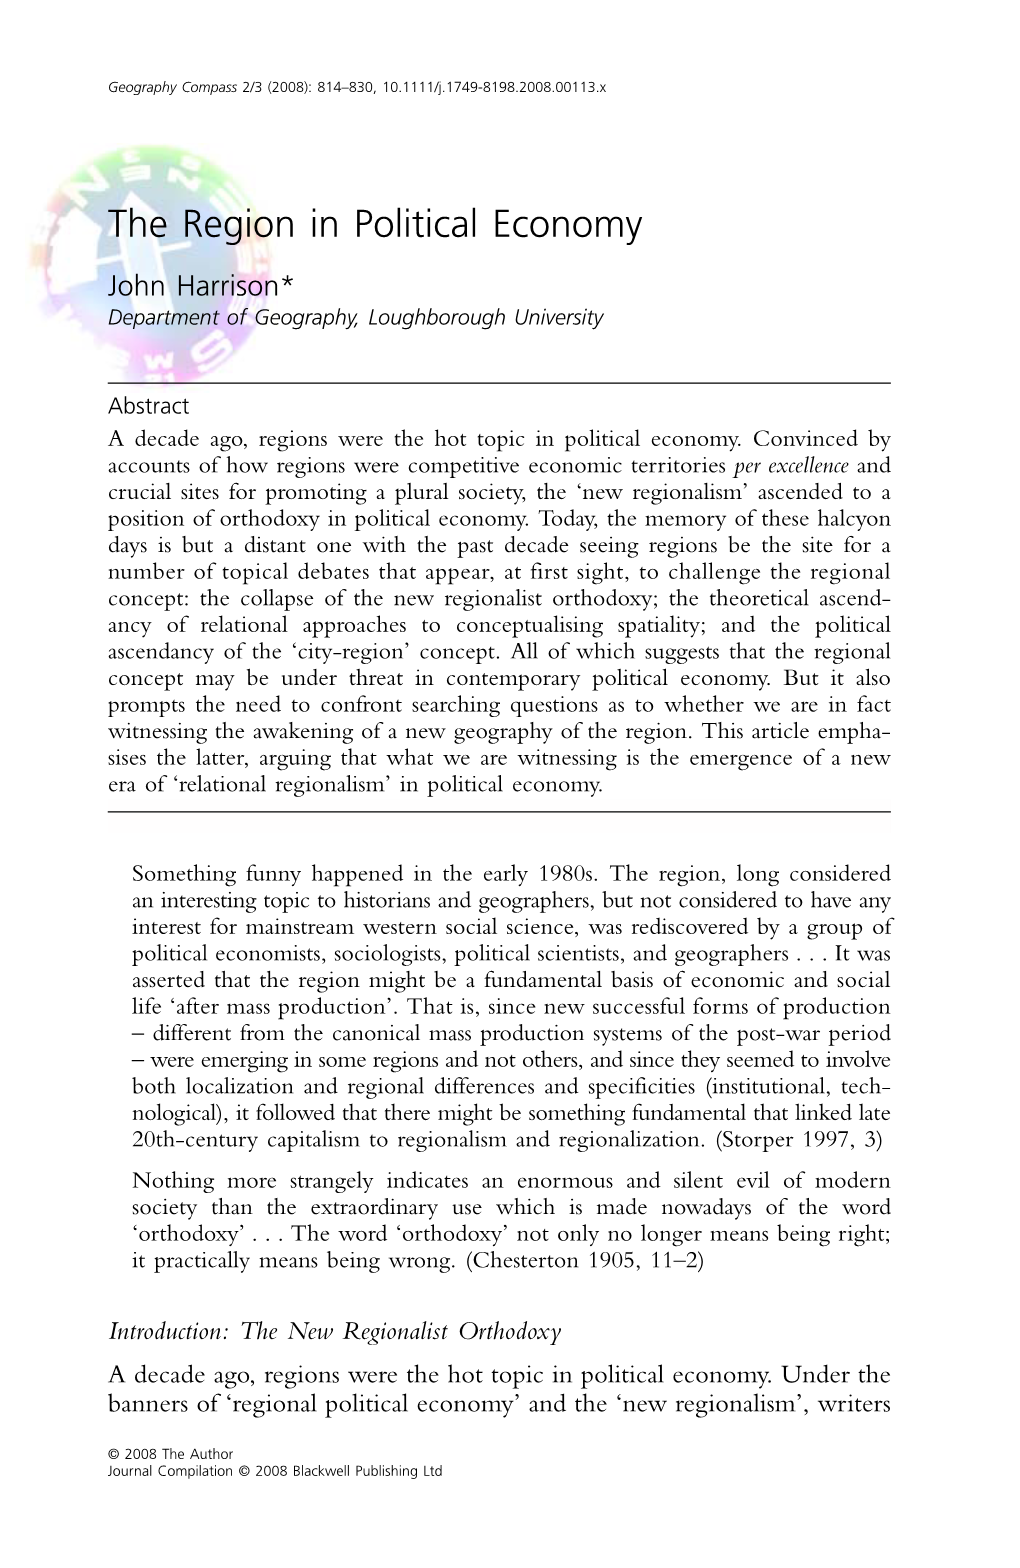 The Region in Political Economy John Harrison* Department of Geography, Loughborough University